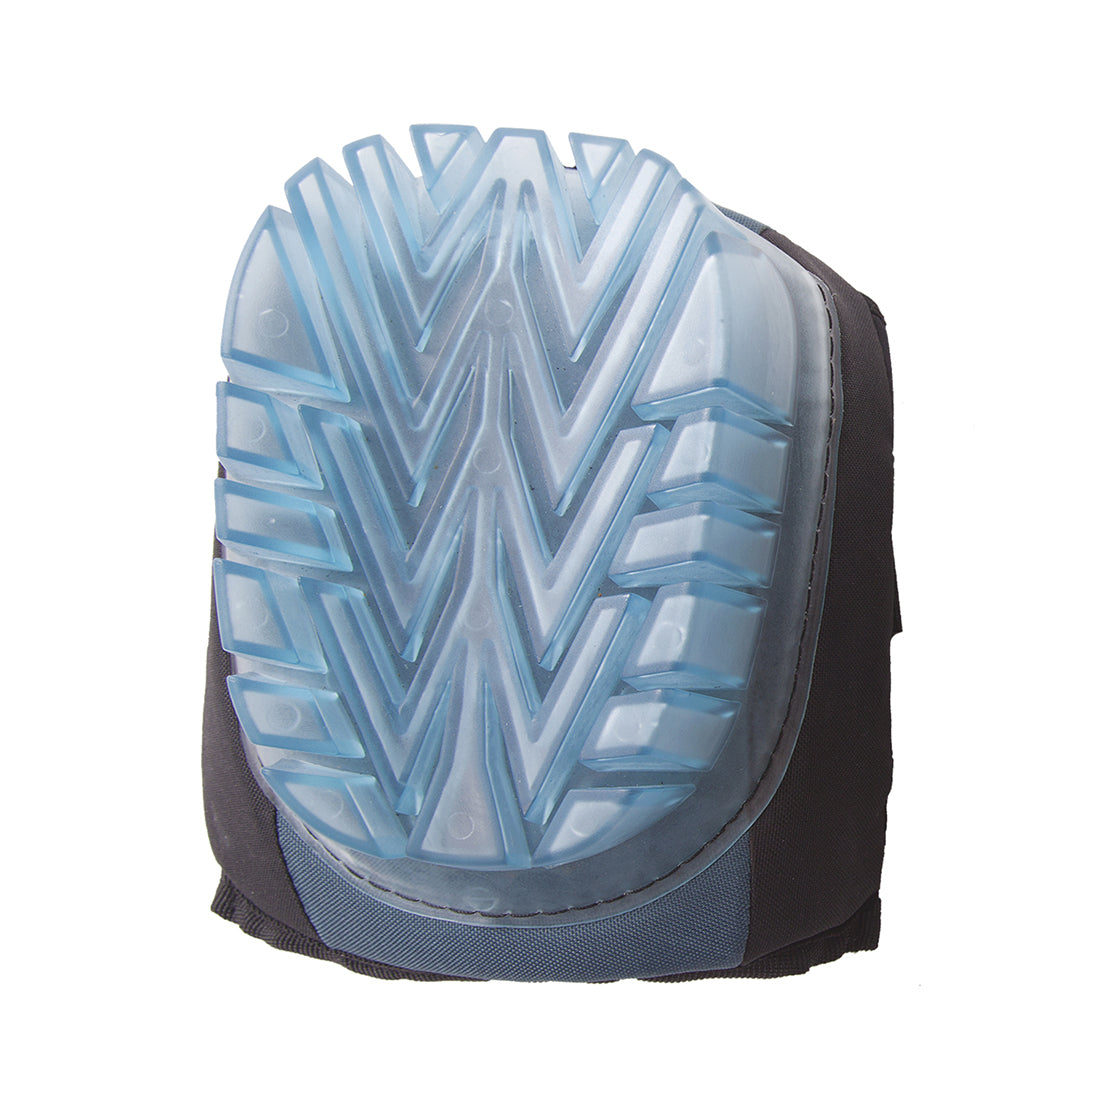 Ultimate Gel Knee Pad Safety Builders Comfort Home Protection from Harm - Hamtons Direct